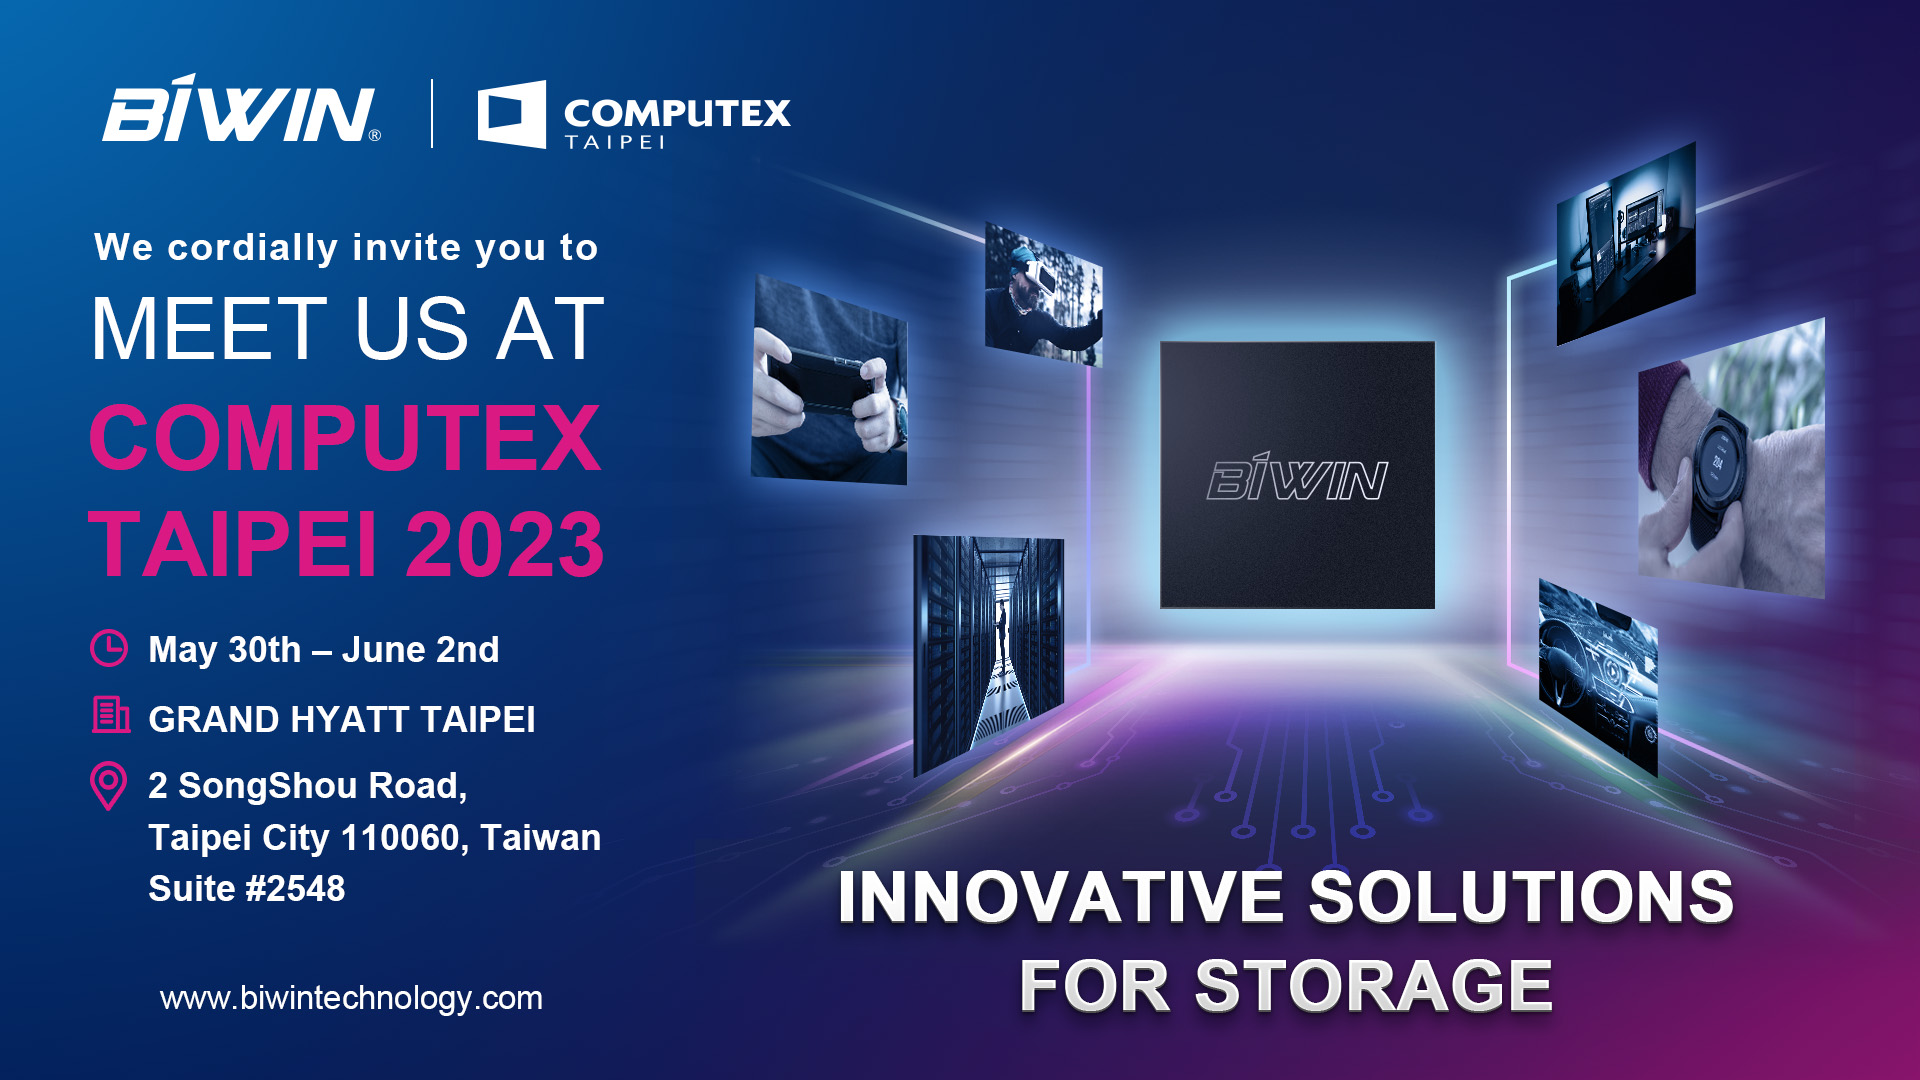 BIWIN to Show Storage Solutions in Taipei, May 30th-June 2nd, 2023